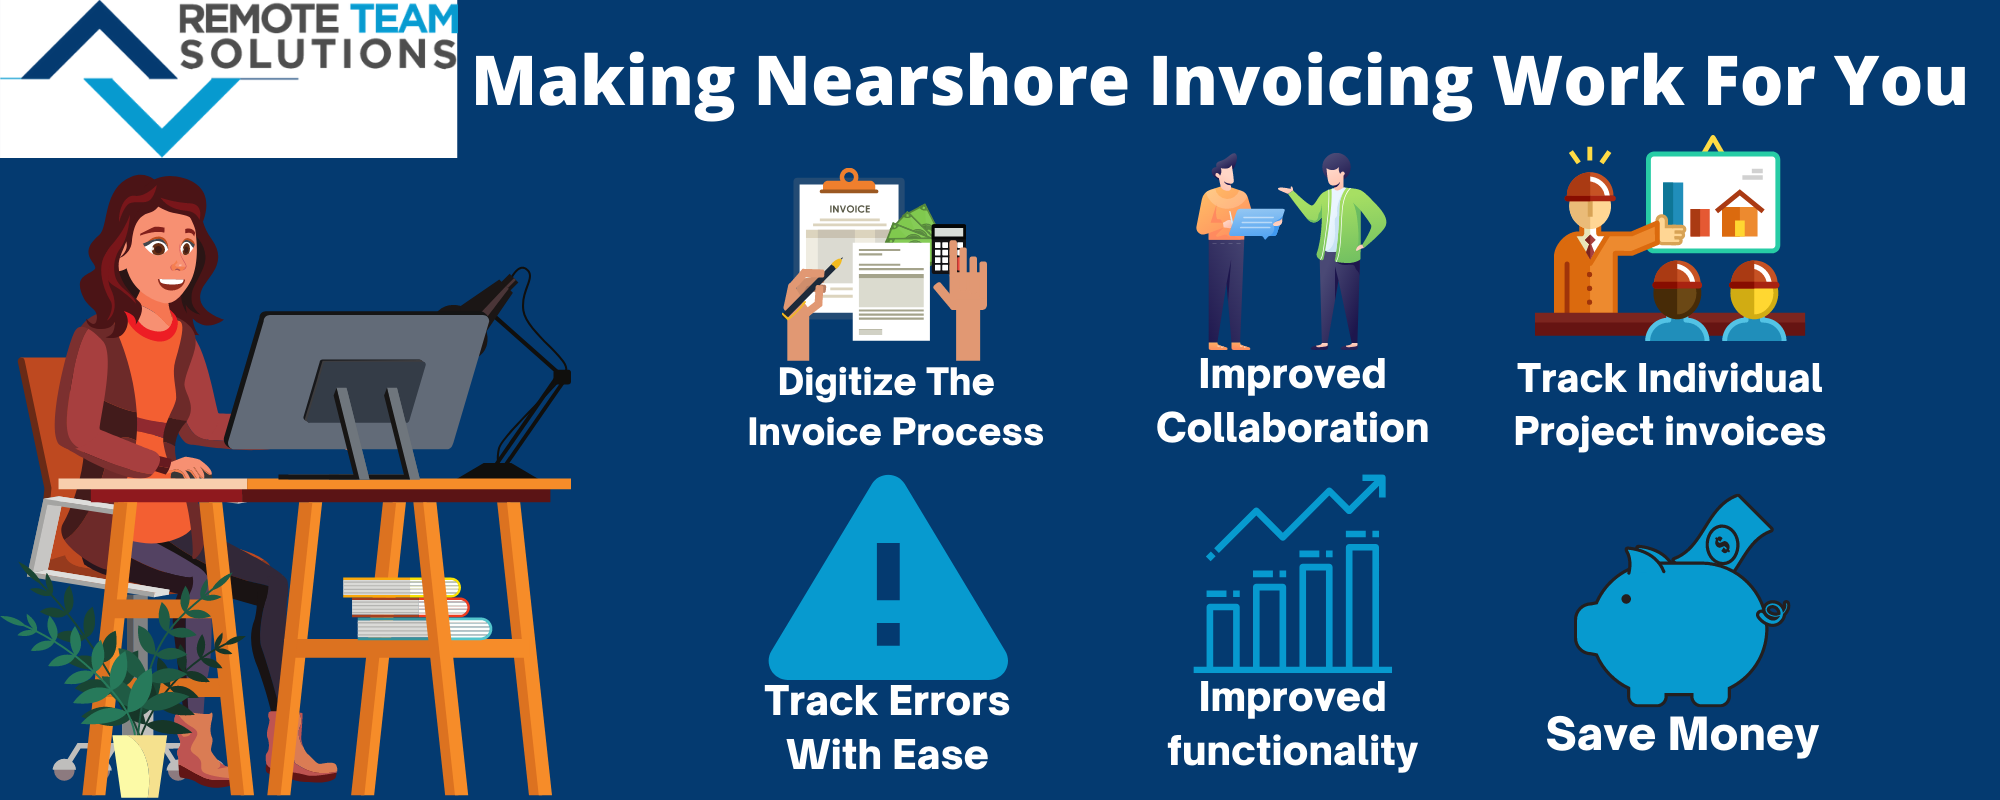 Infographic explaining why nearshore invoicing helps businesses.